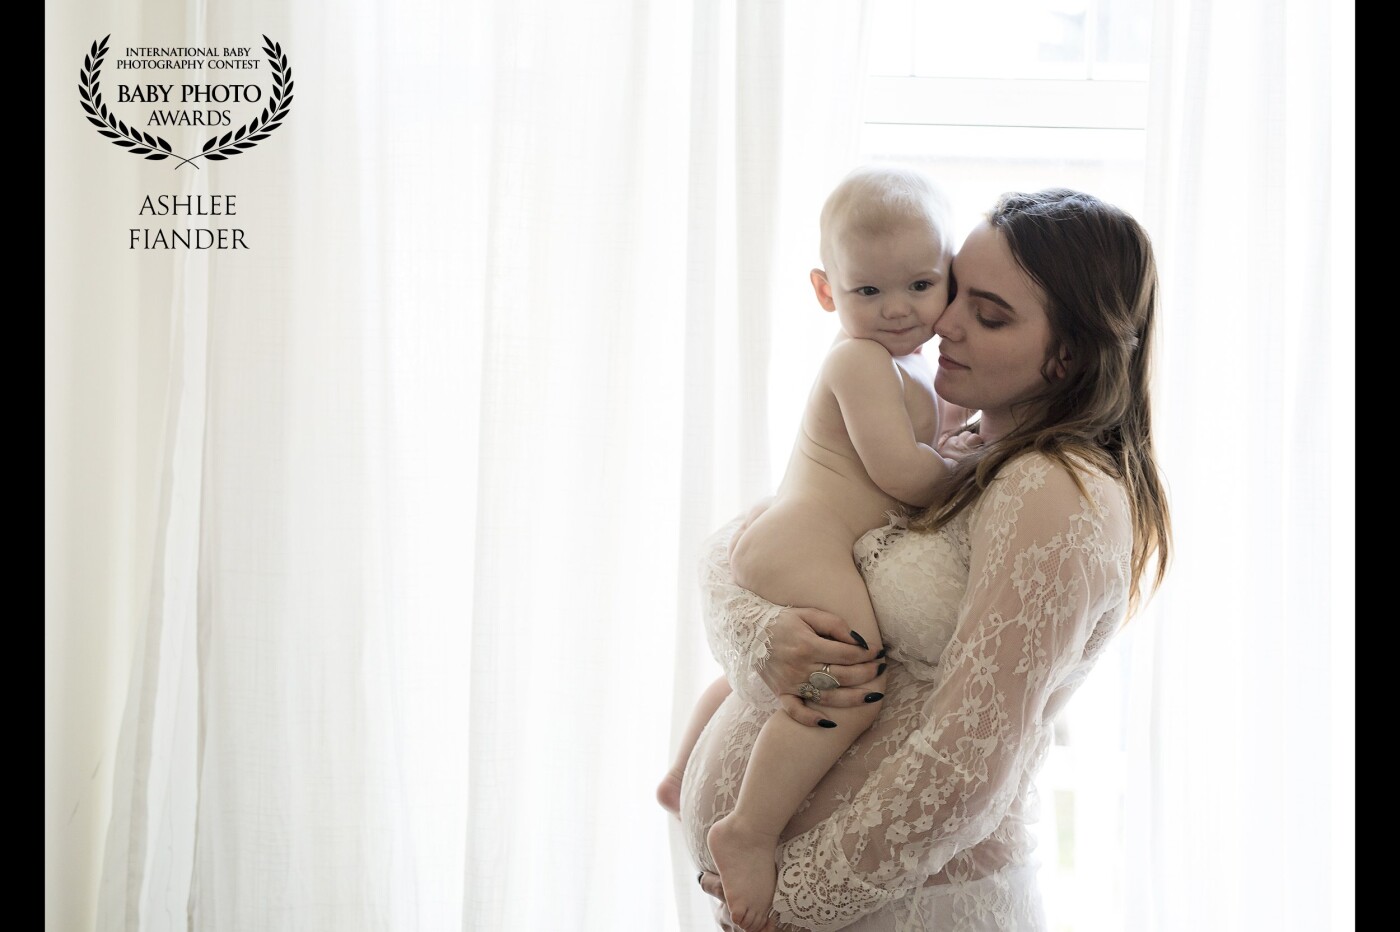 Such an honour to win an award with this image as it is very special to me, my cousin and her son Milo snuggling and loving her baby bump before baby Wynn arrived. This was taken in her home before a milk bath photo session and I just couldn't resist the gorgeous light coming through!